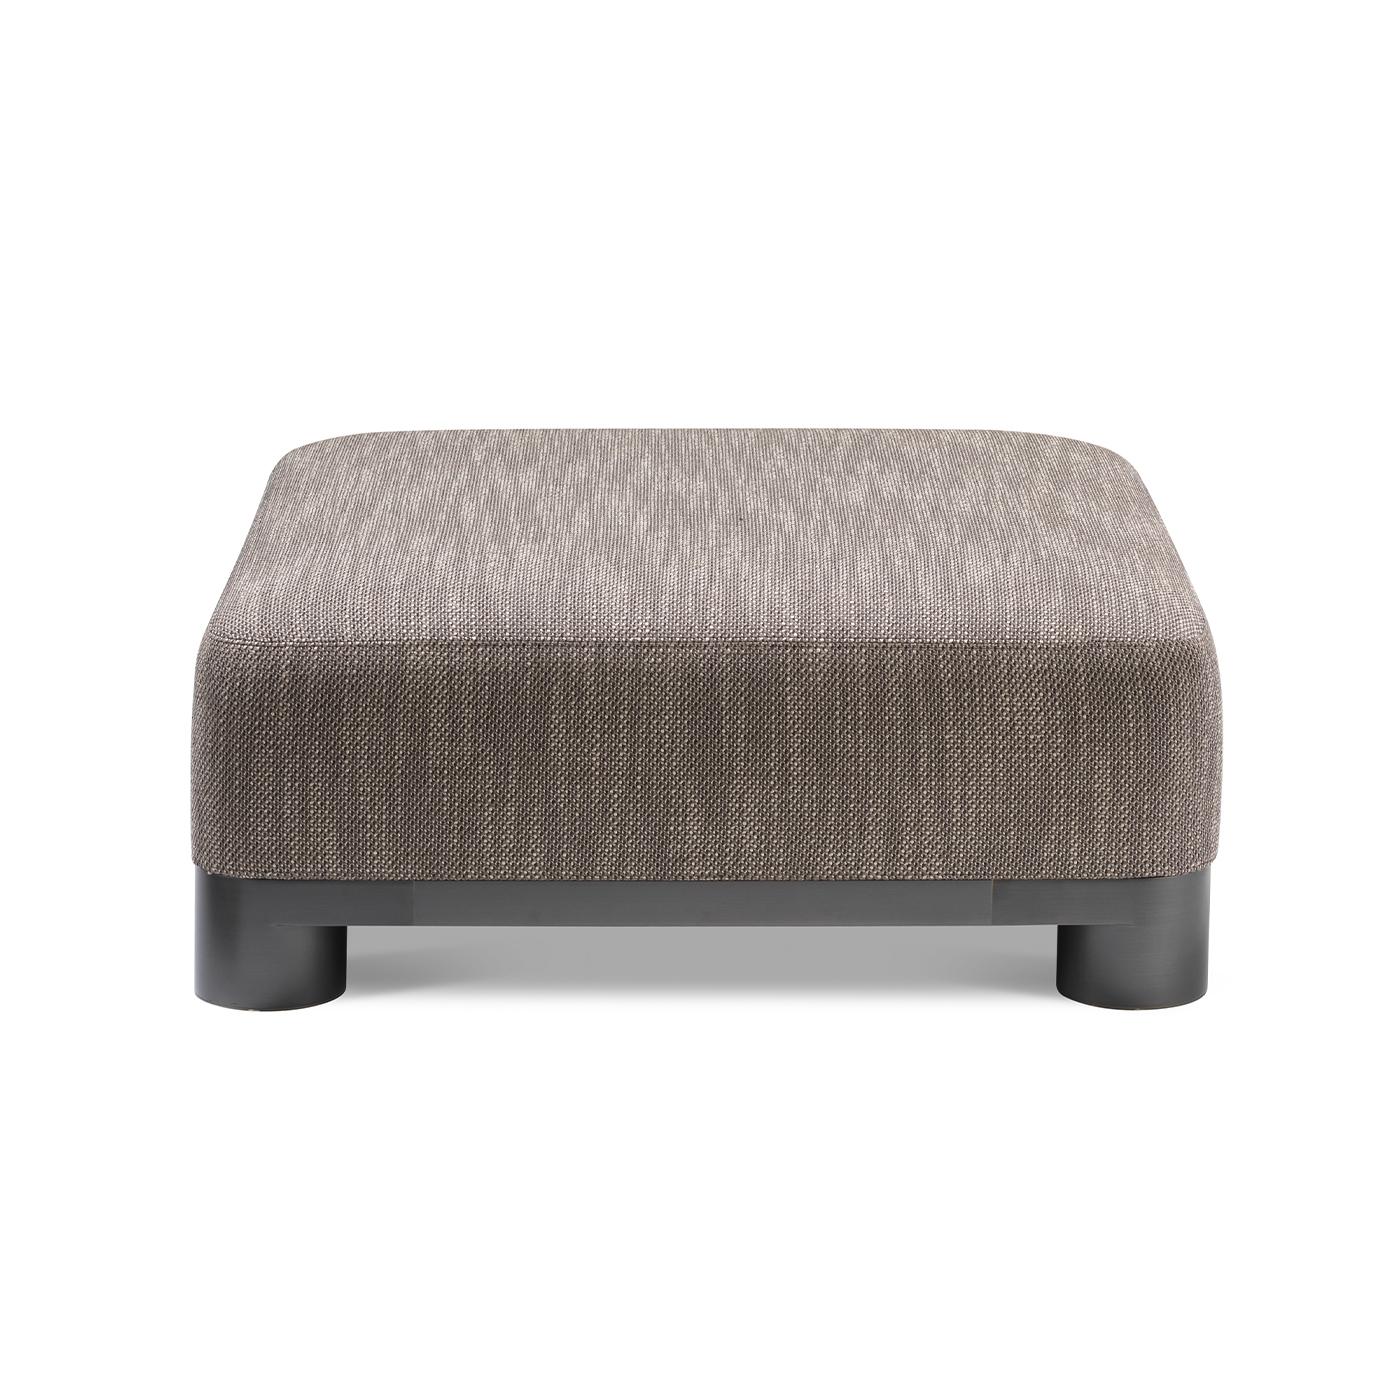 This understated yet refined ottoman is truly an elegant piece of contemporary design. Part of the Bold Collection, it showcases a sleek square-shape and opaque black satin-finished brass base with classic round feet, along with a comfortably padded